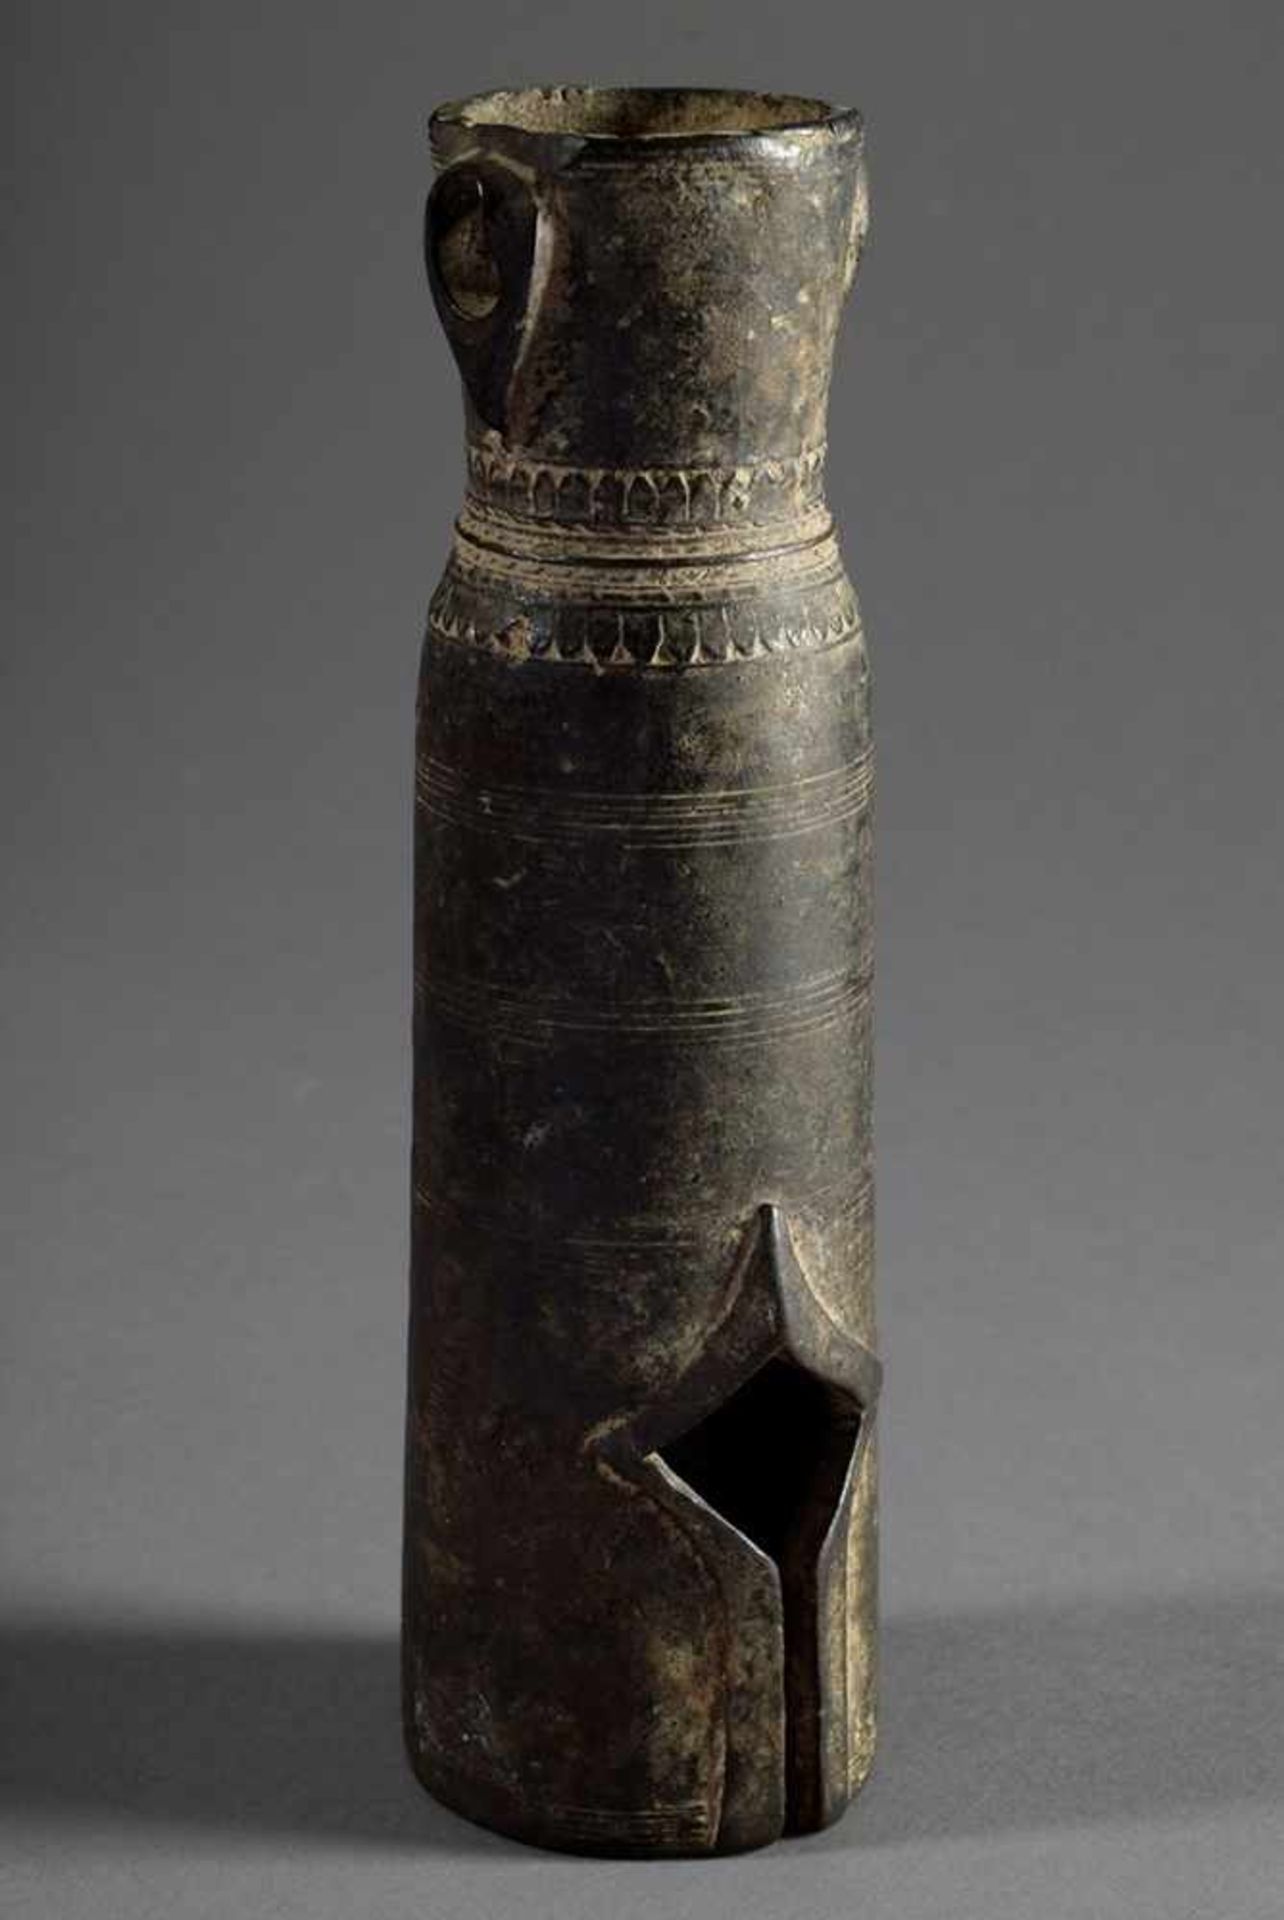 Khmer bronze bell, later Bayon style, Cambodia 15th/16th century, h. 19cm